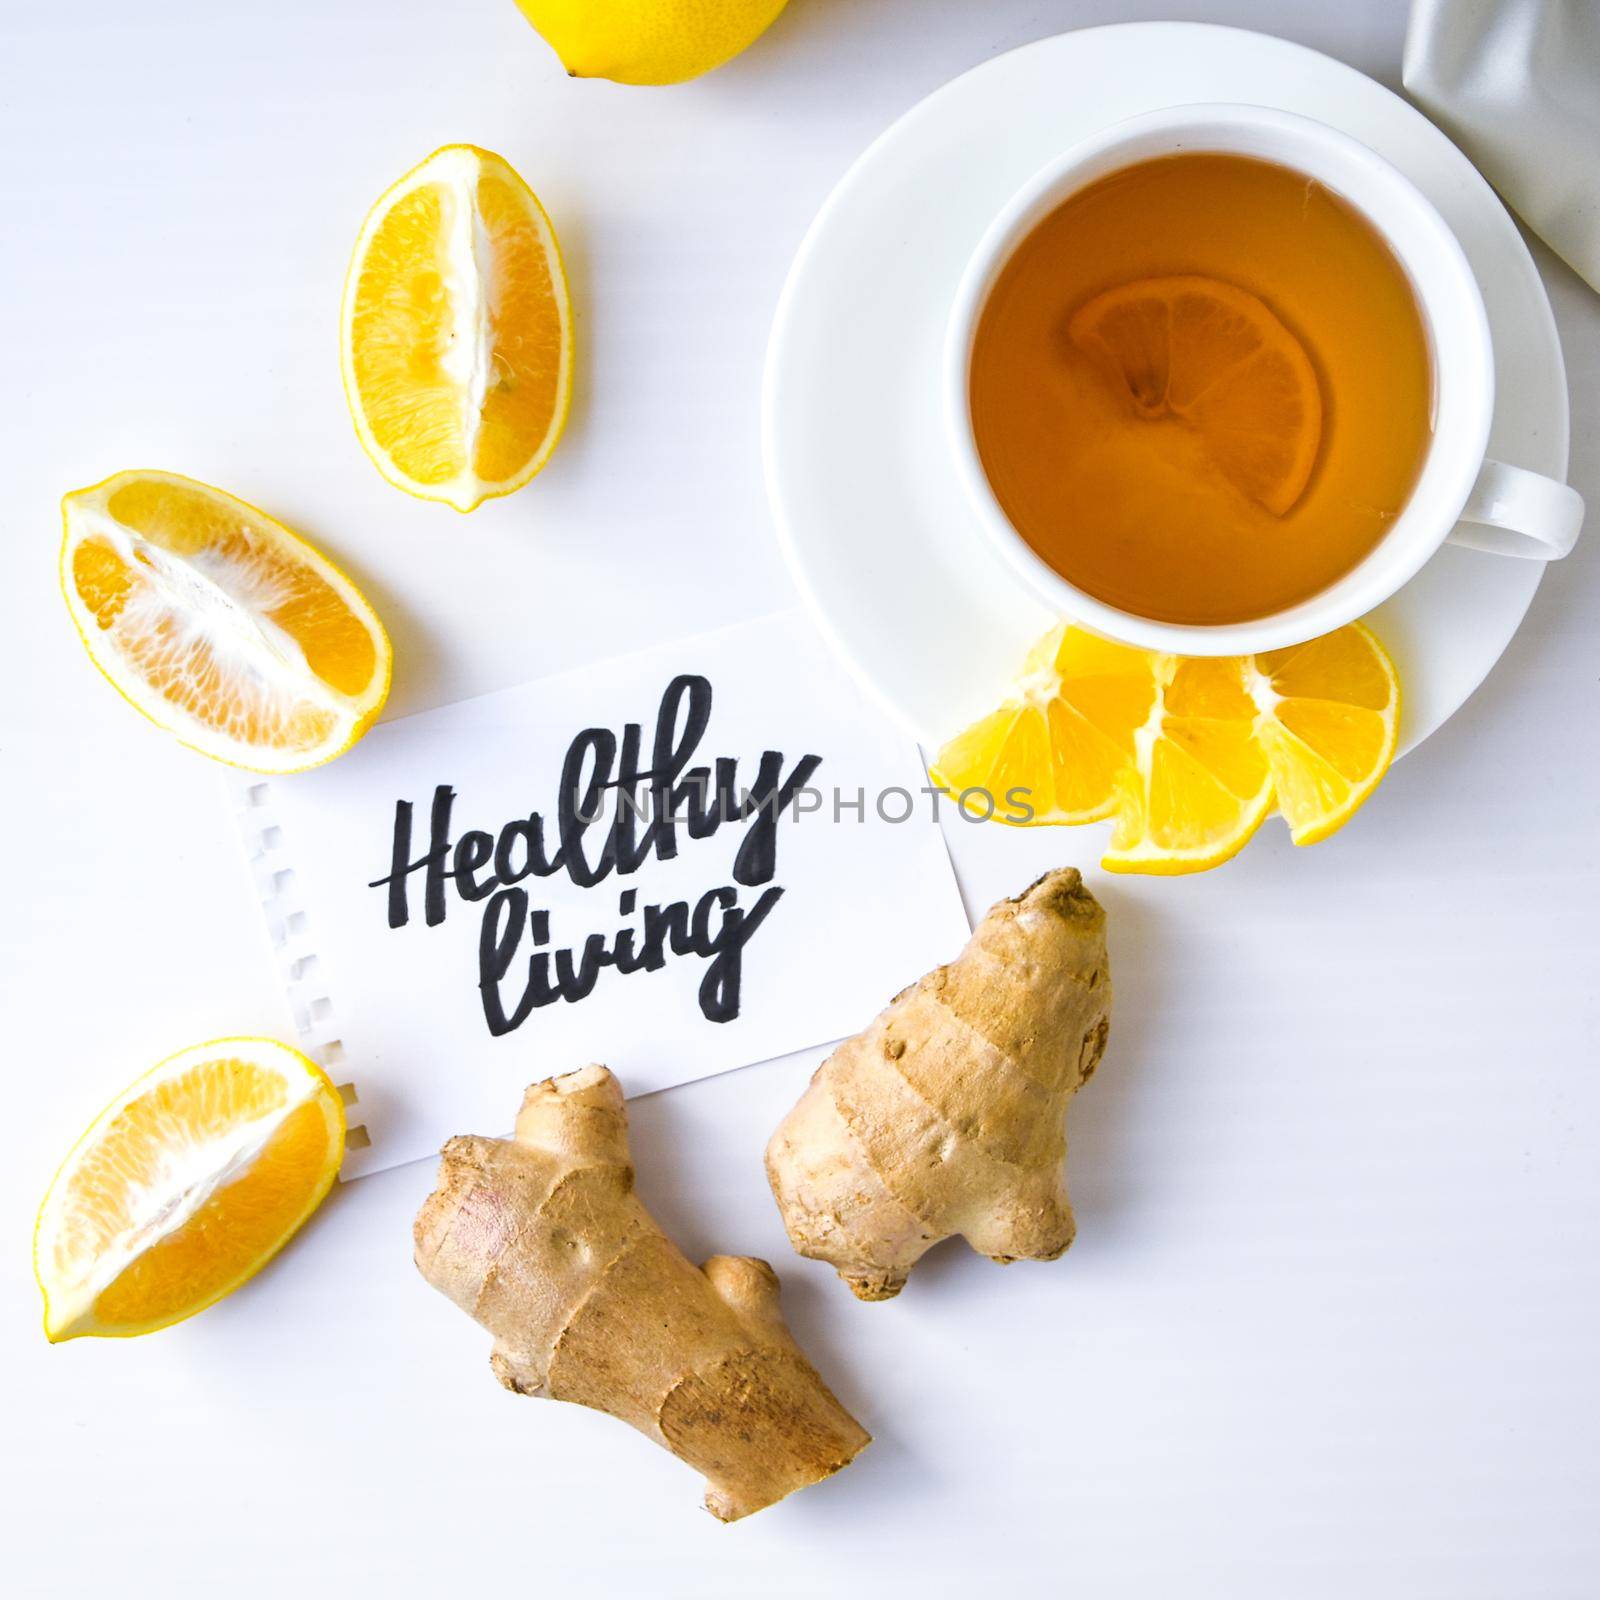 HEALTHY LIVING - written on piece of paper among the products for the treatment of common cold - lemon, ginger, chamomile tea. Vitamin natural drink by anna_stasiia